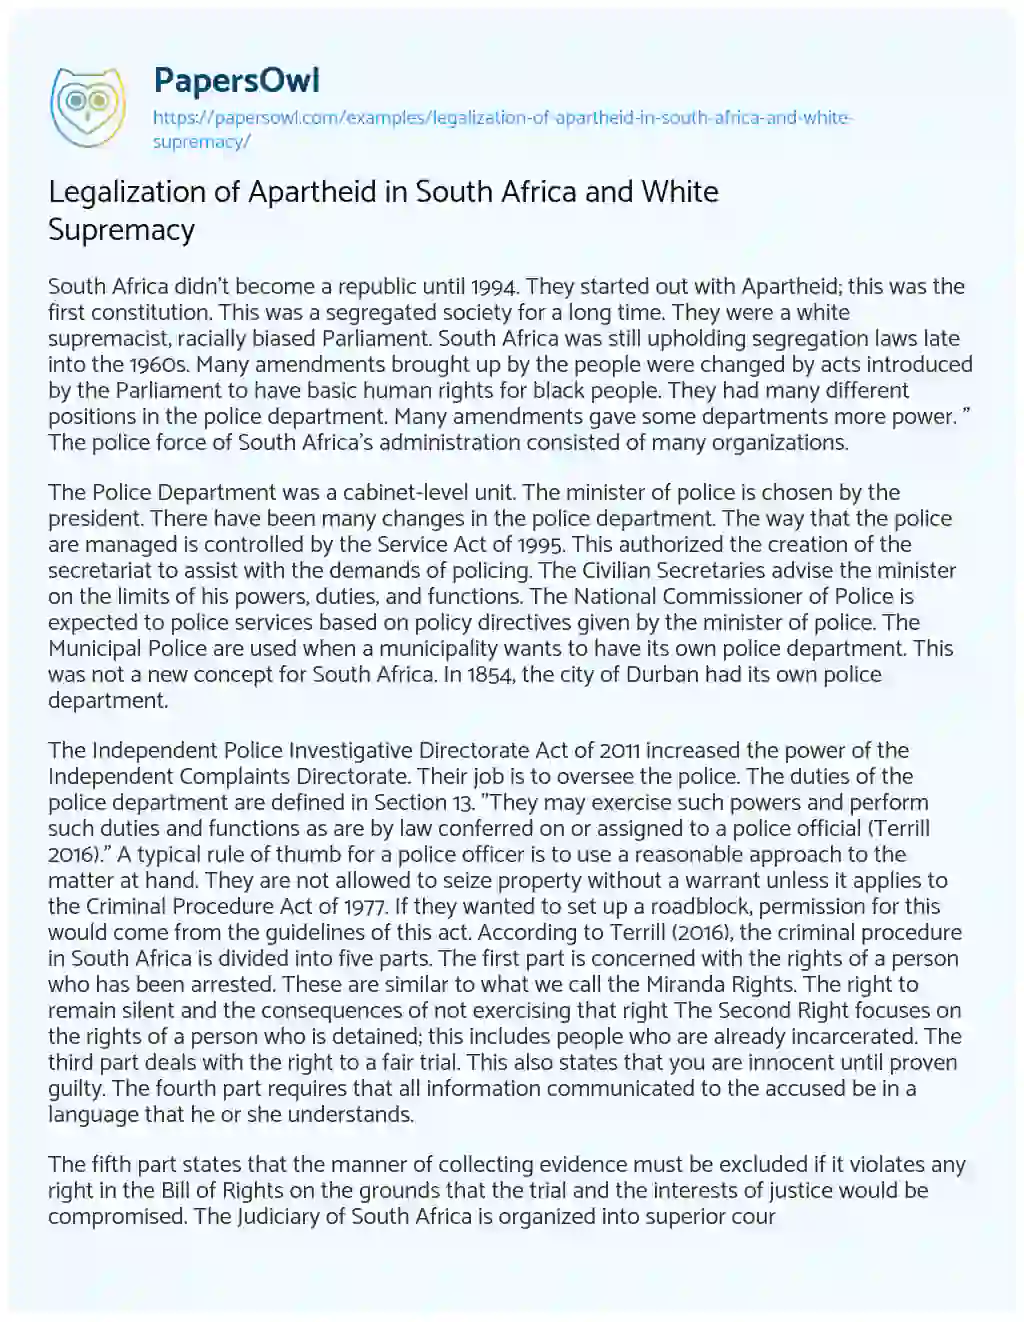 Essay on Legalization of Apartheid in South Africa and White Supremacy